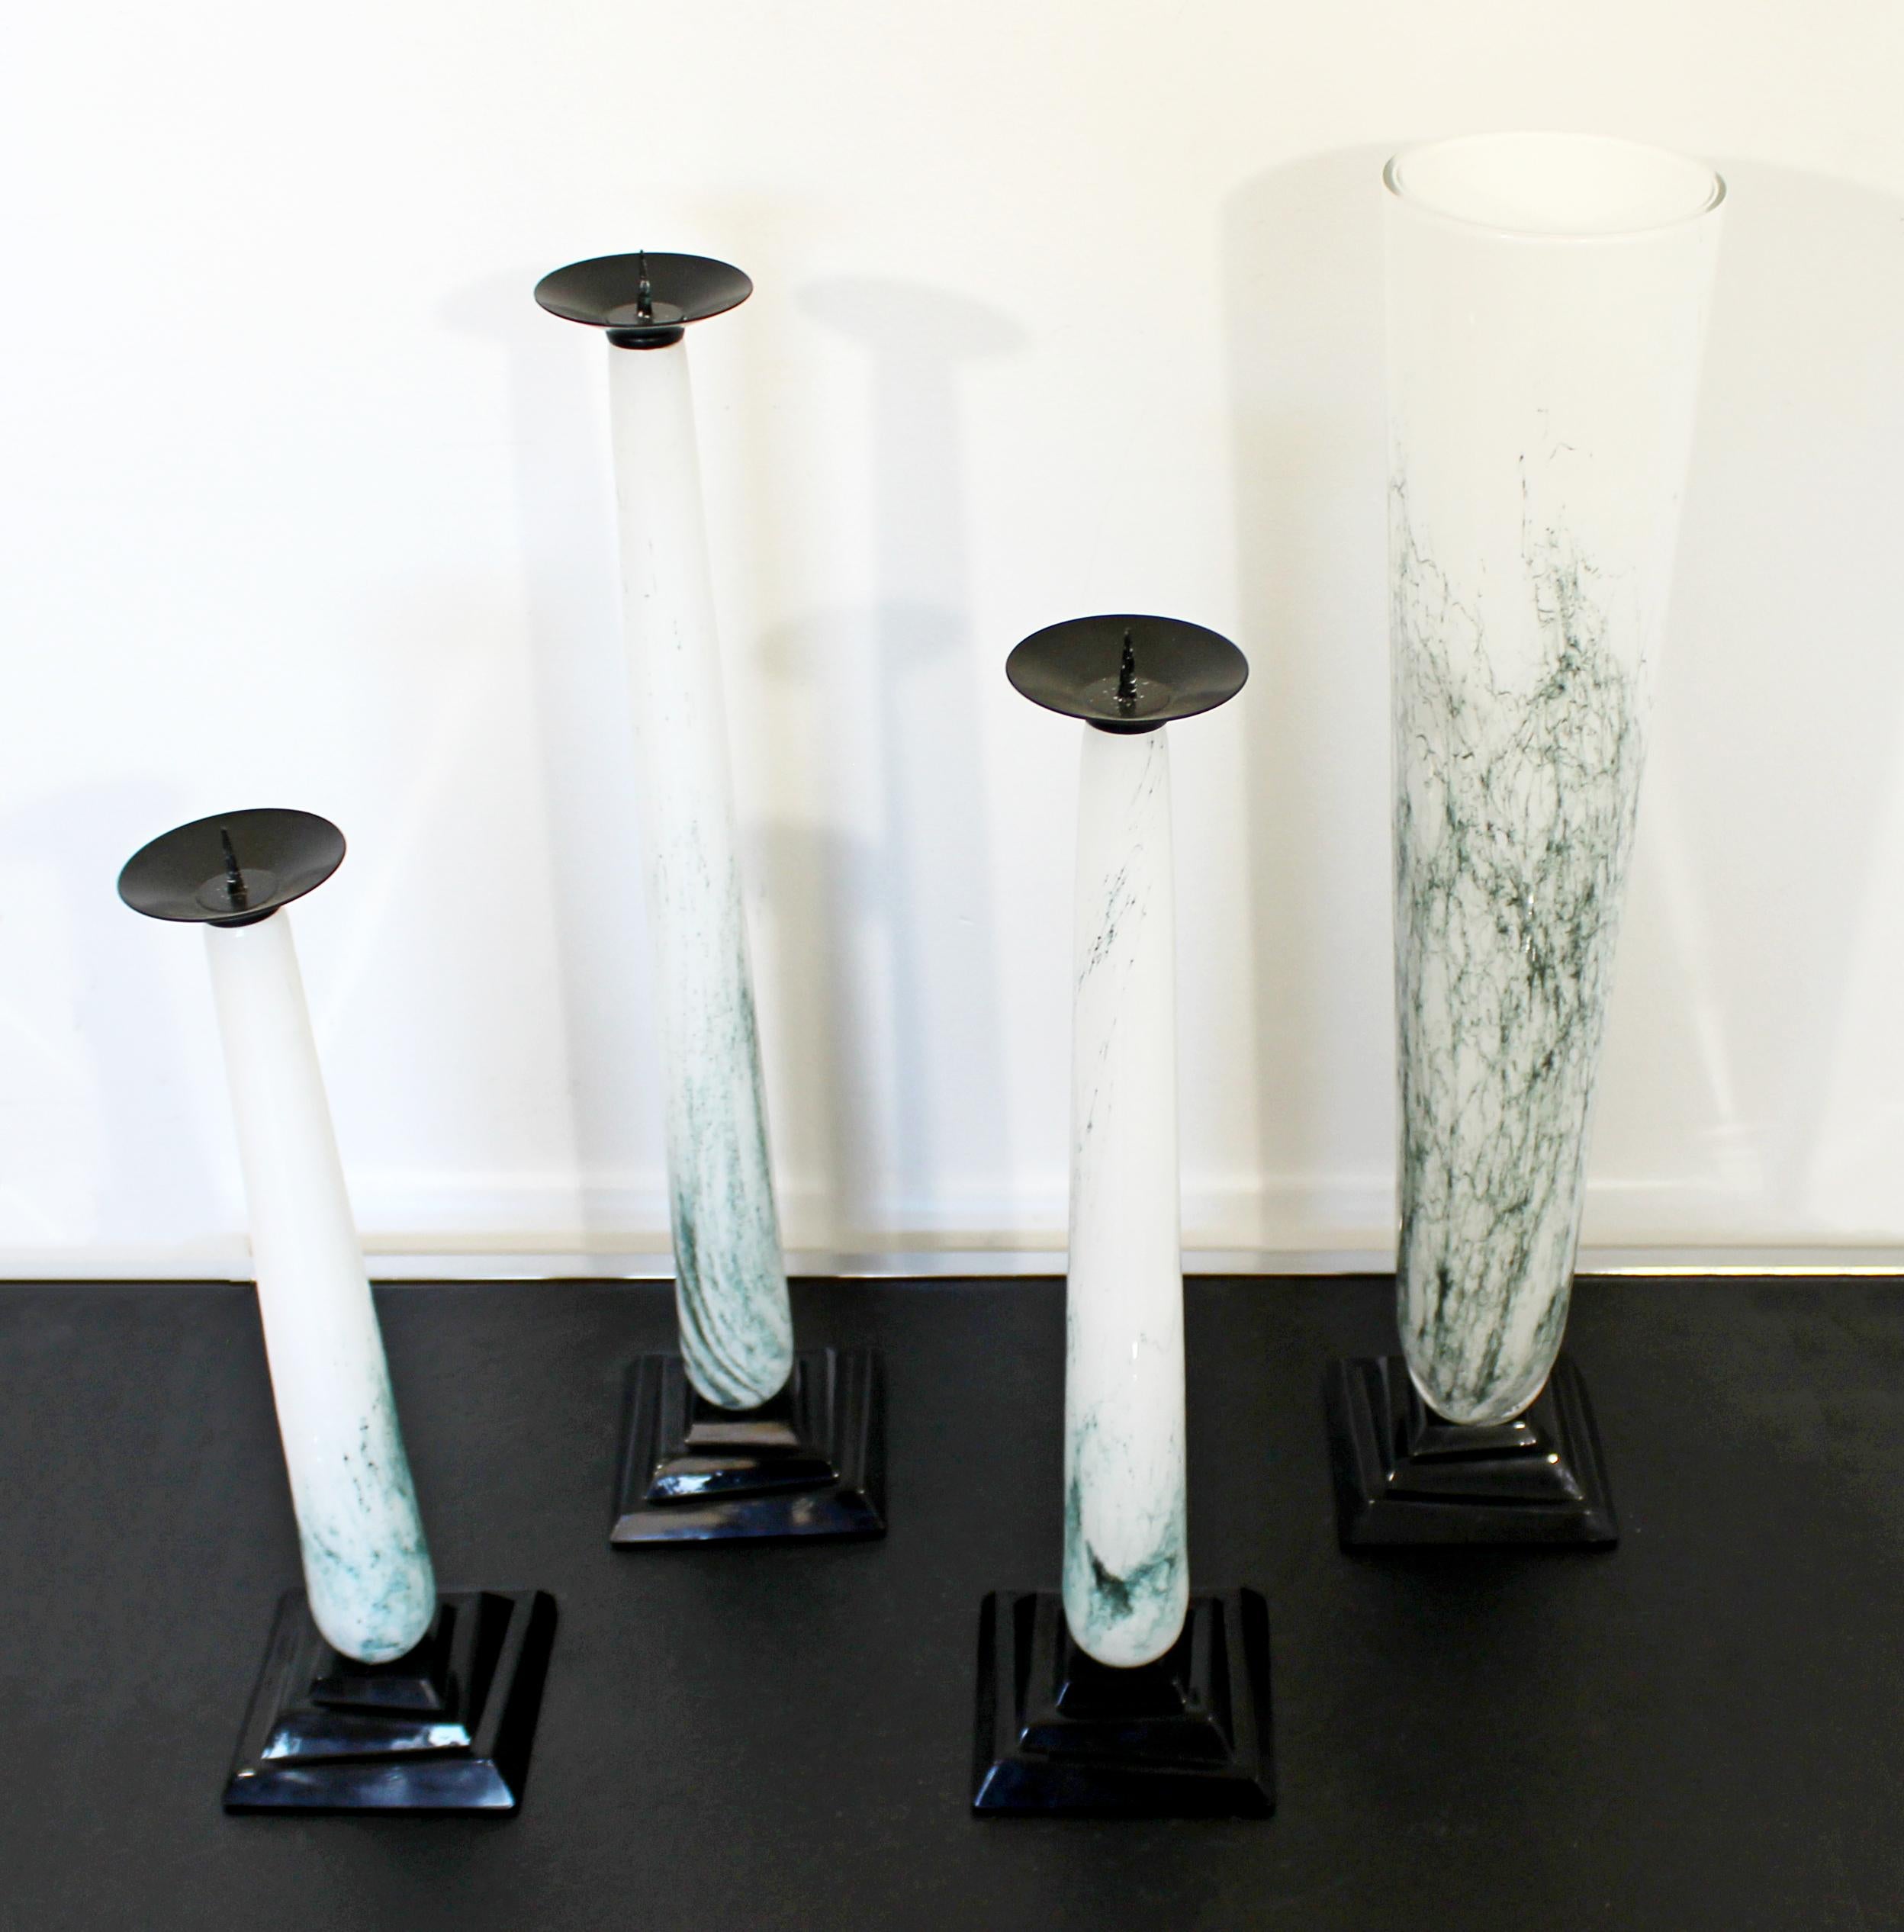 For your consideration is a show stopping set of three glass candlesticks and matching vase, made in Italy, by Seguso Vetri D'Arte, circa 1980s. In excellent condition. The dimensions of each are 4.5